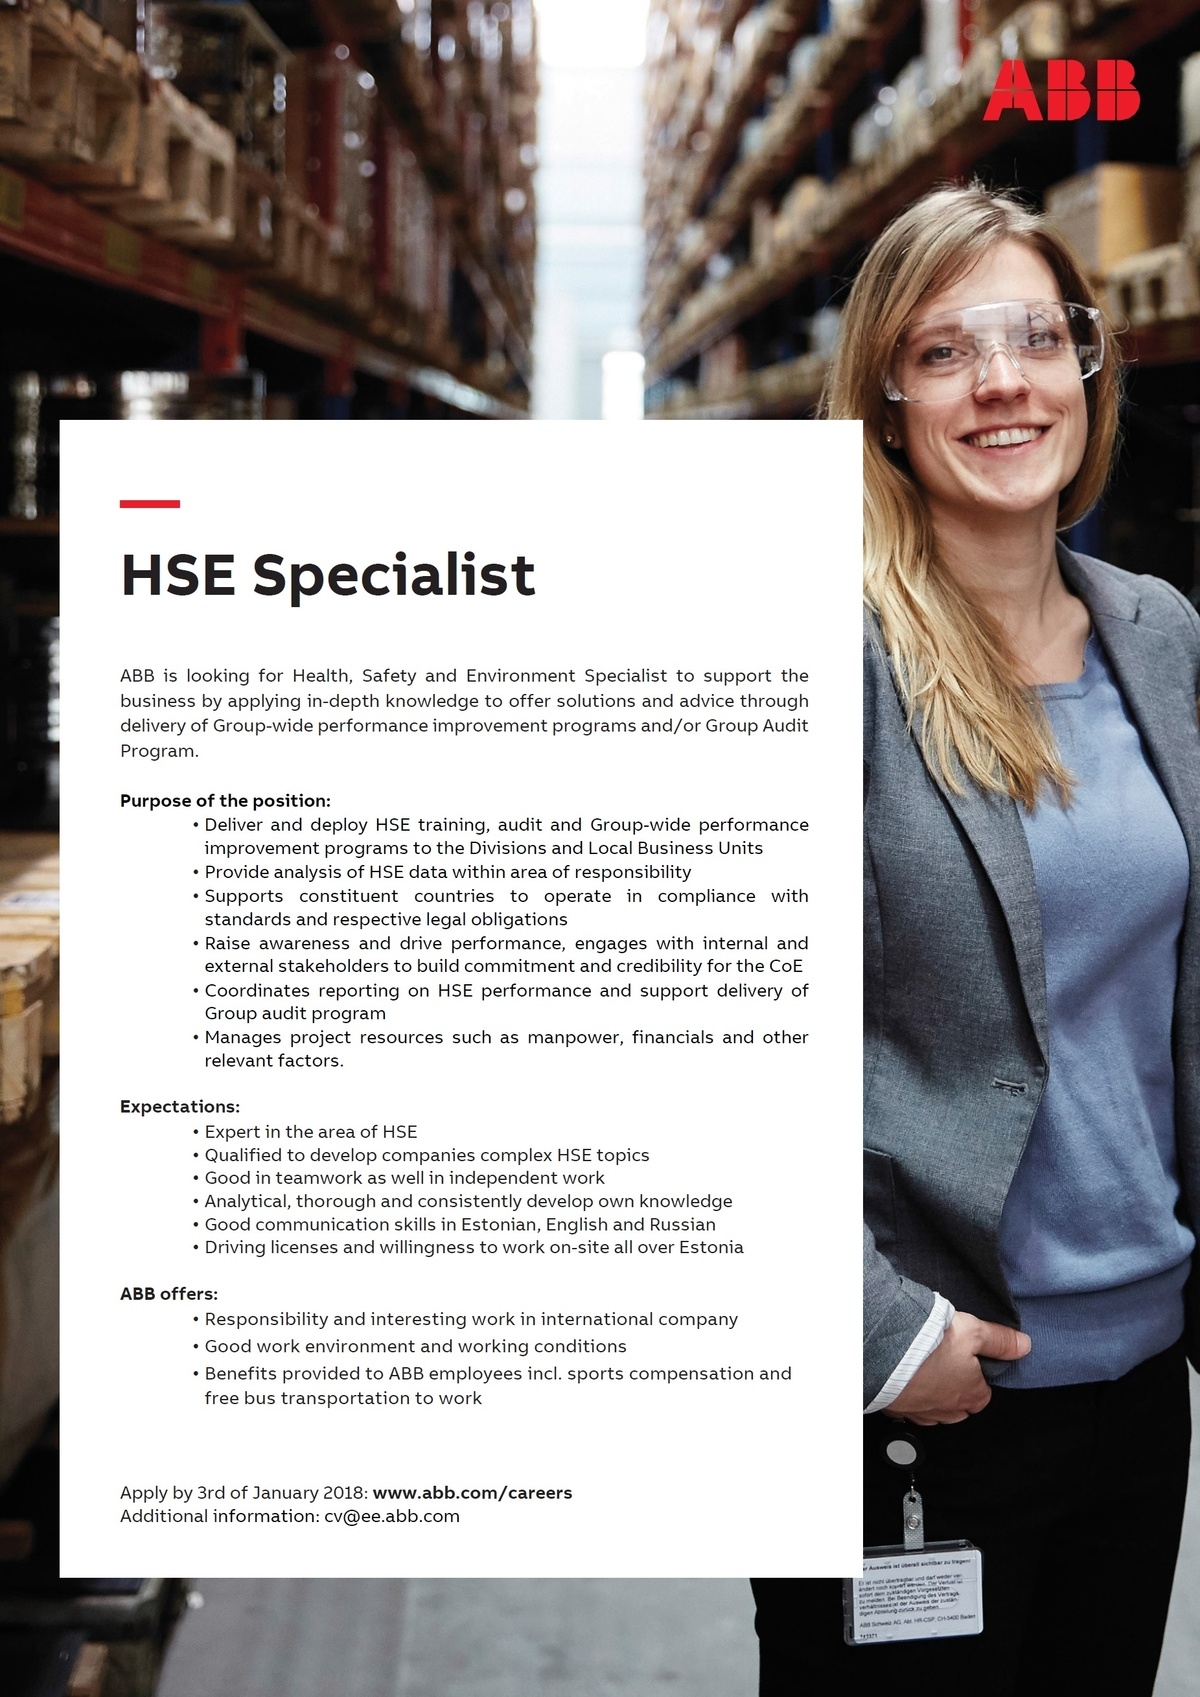 ABB AS HSE Specialist